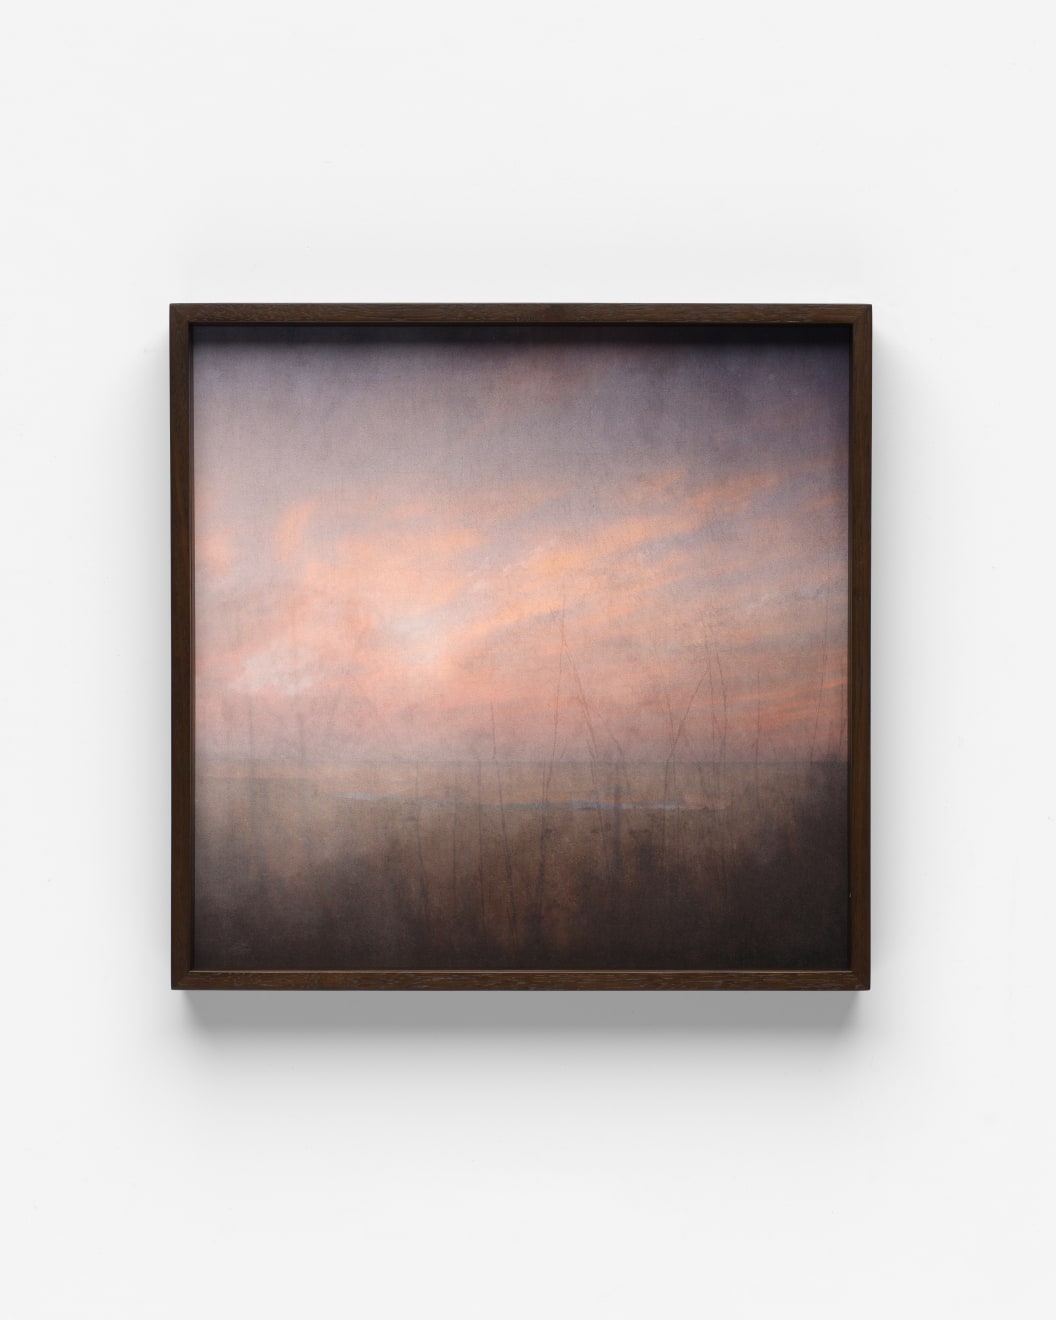 Sophia Szilagyi The Brush of Remembering Archival Pigment Print Dark Brown Frame 45 x 44 cm Limited Edition 10 AUD $1250 GBP £615